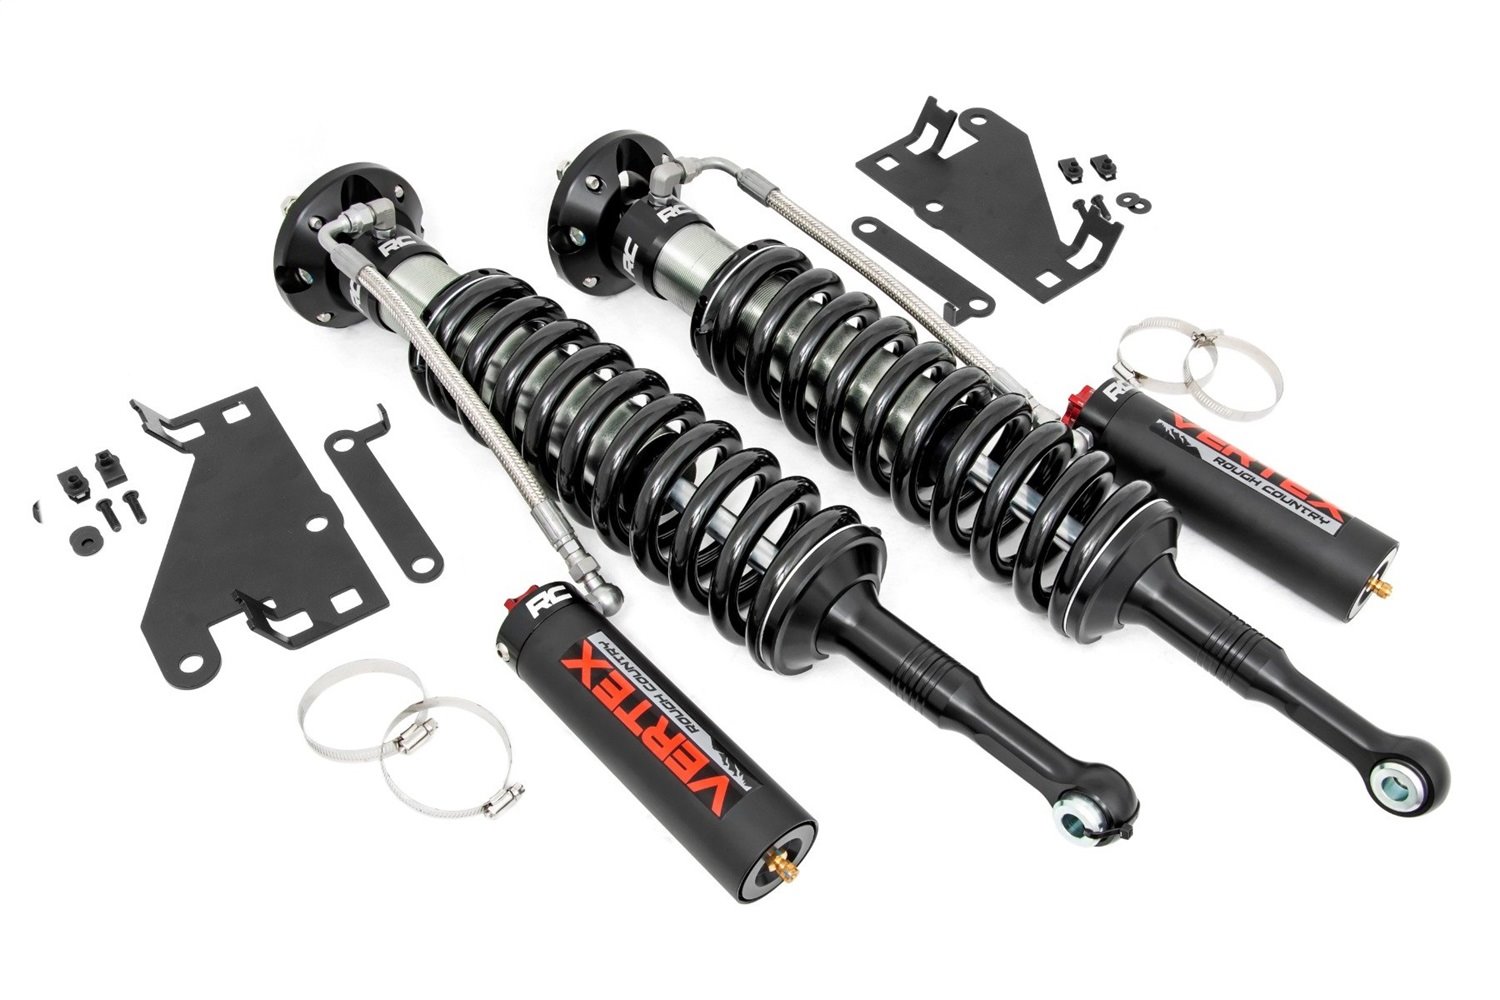 689050 Vertex 2.5 Adjustable Coilovers, Front, 6", Fits Select Toyota Tundra